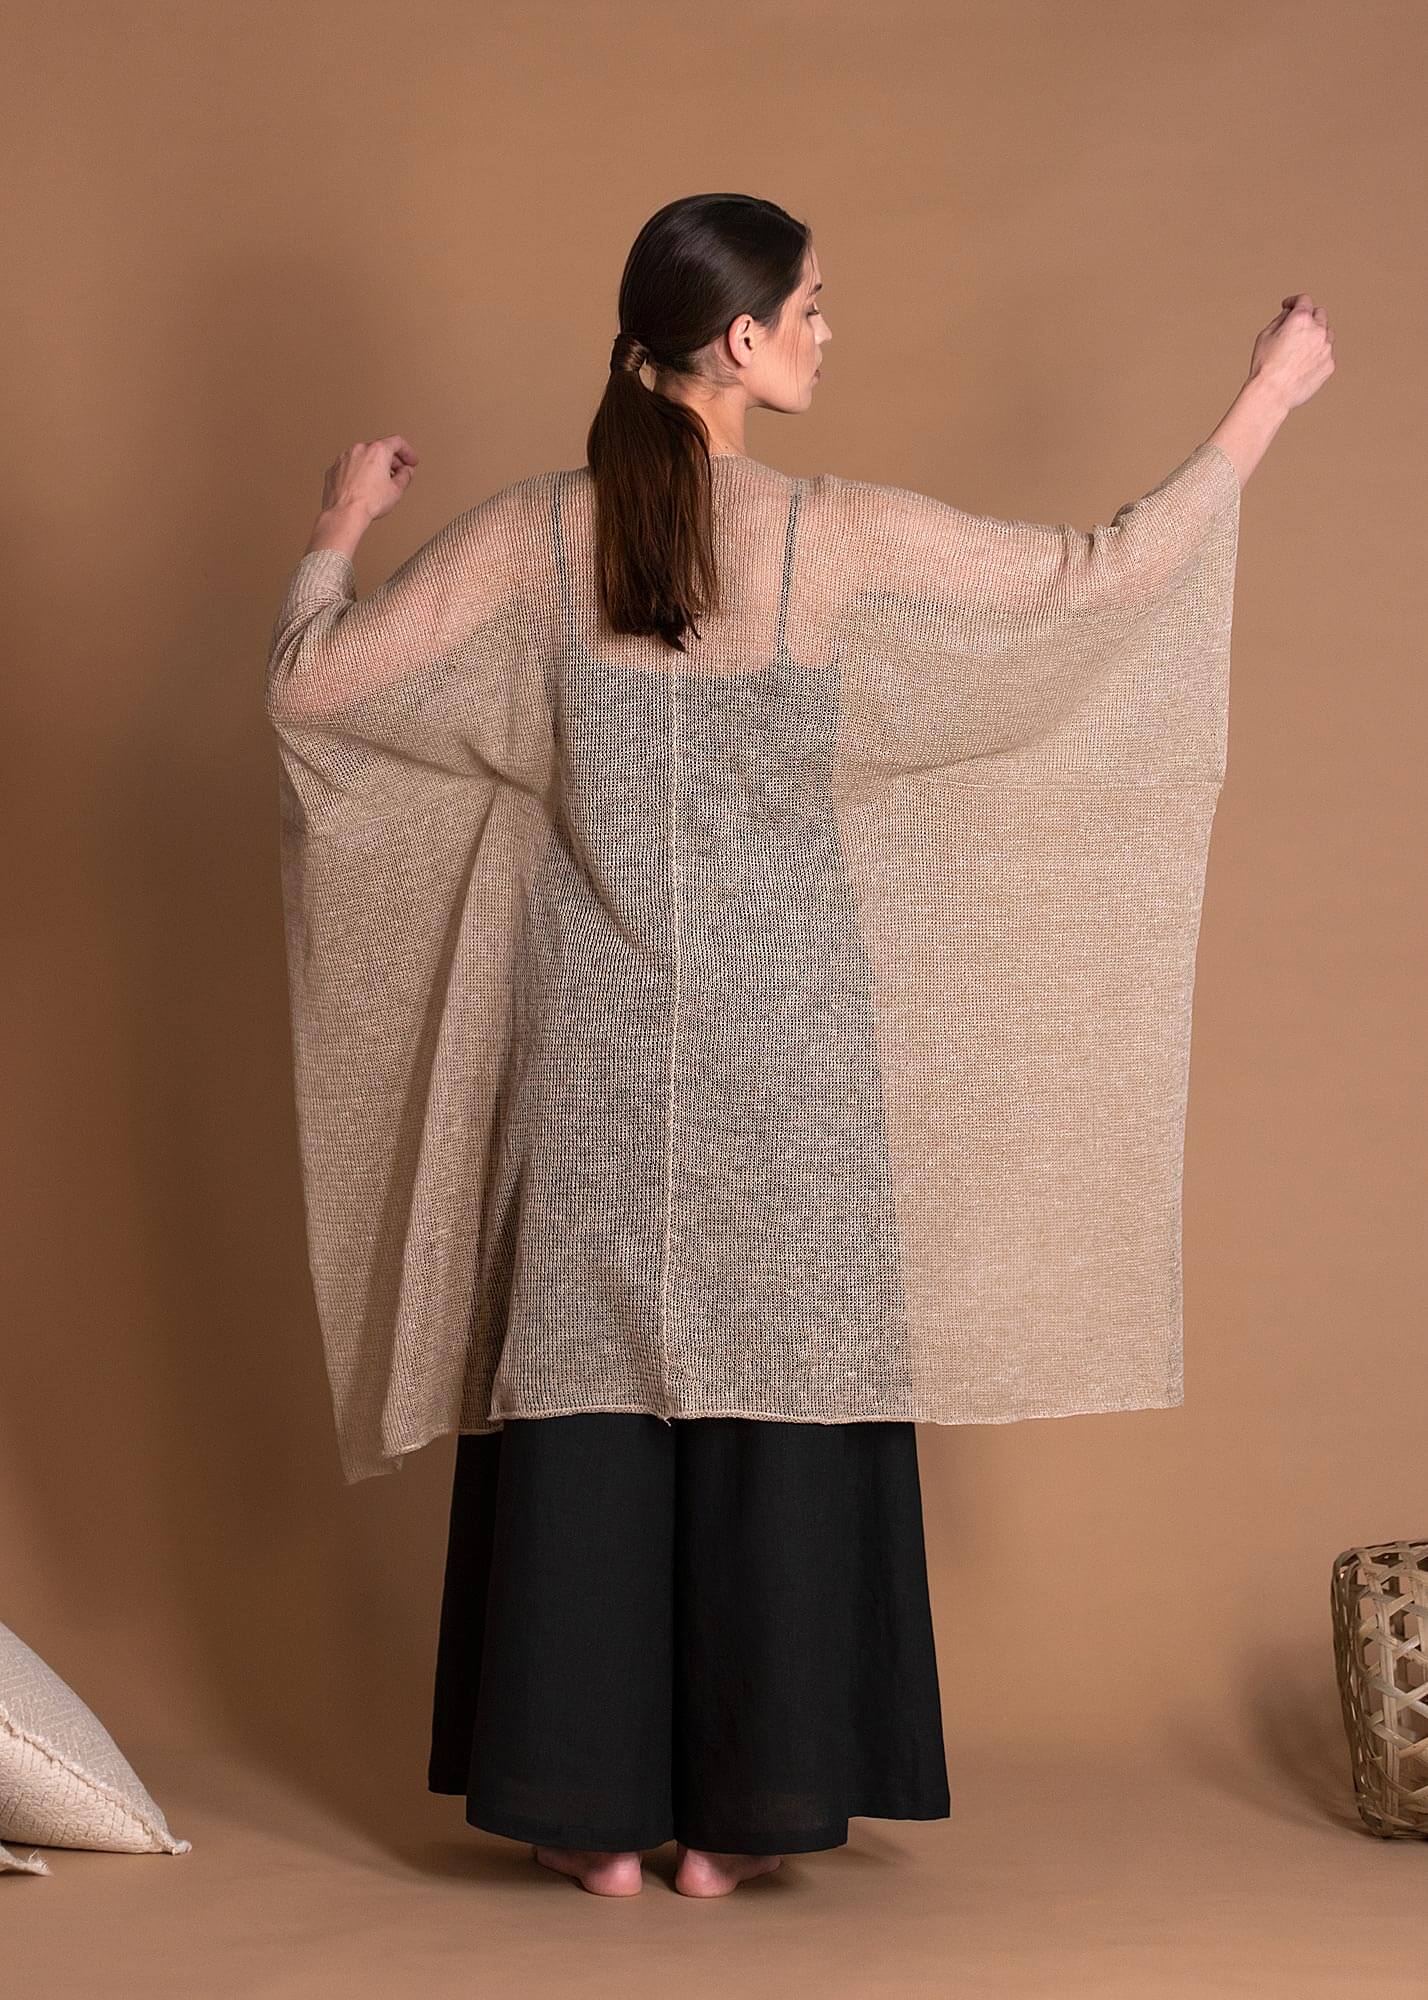 Knitted Natural Flax Cover Up With Wide Sleeves For Women